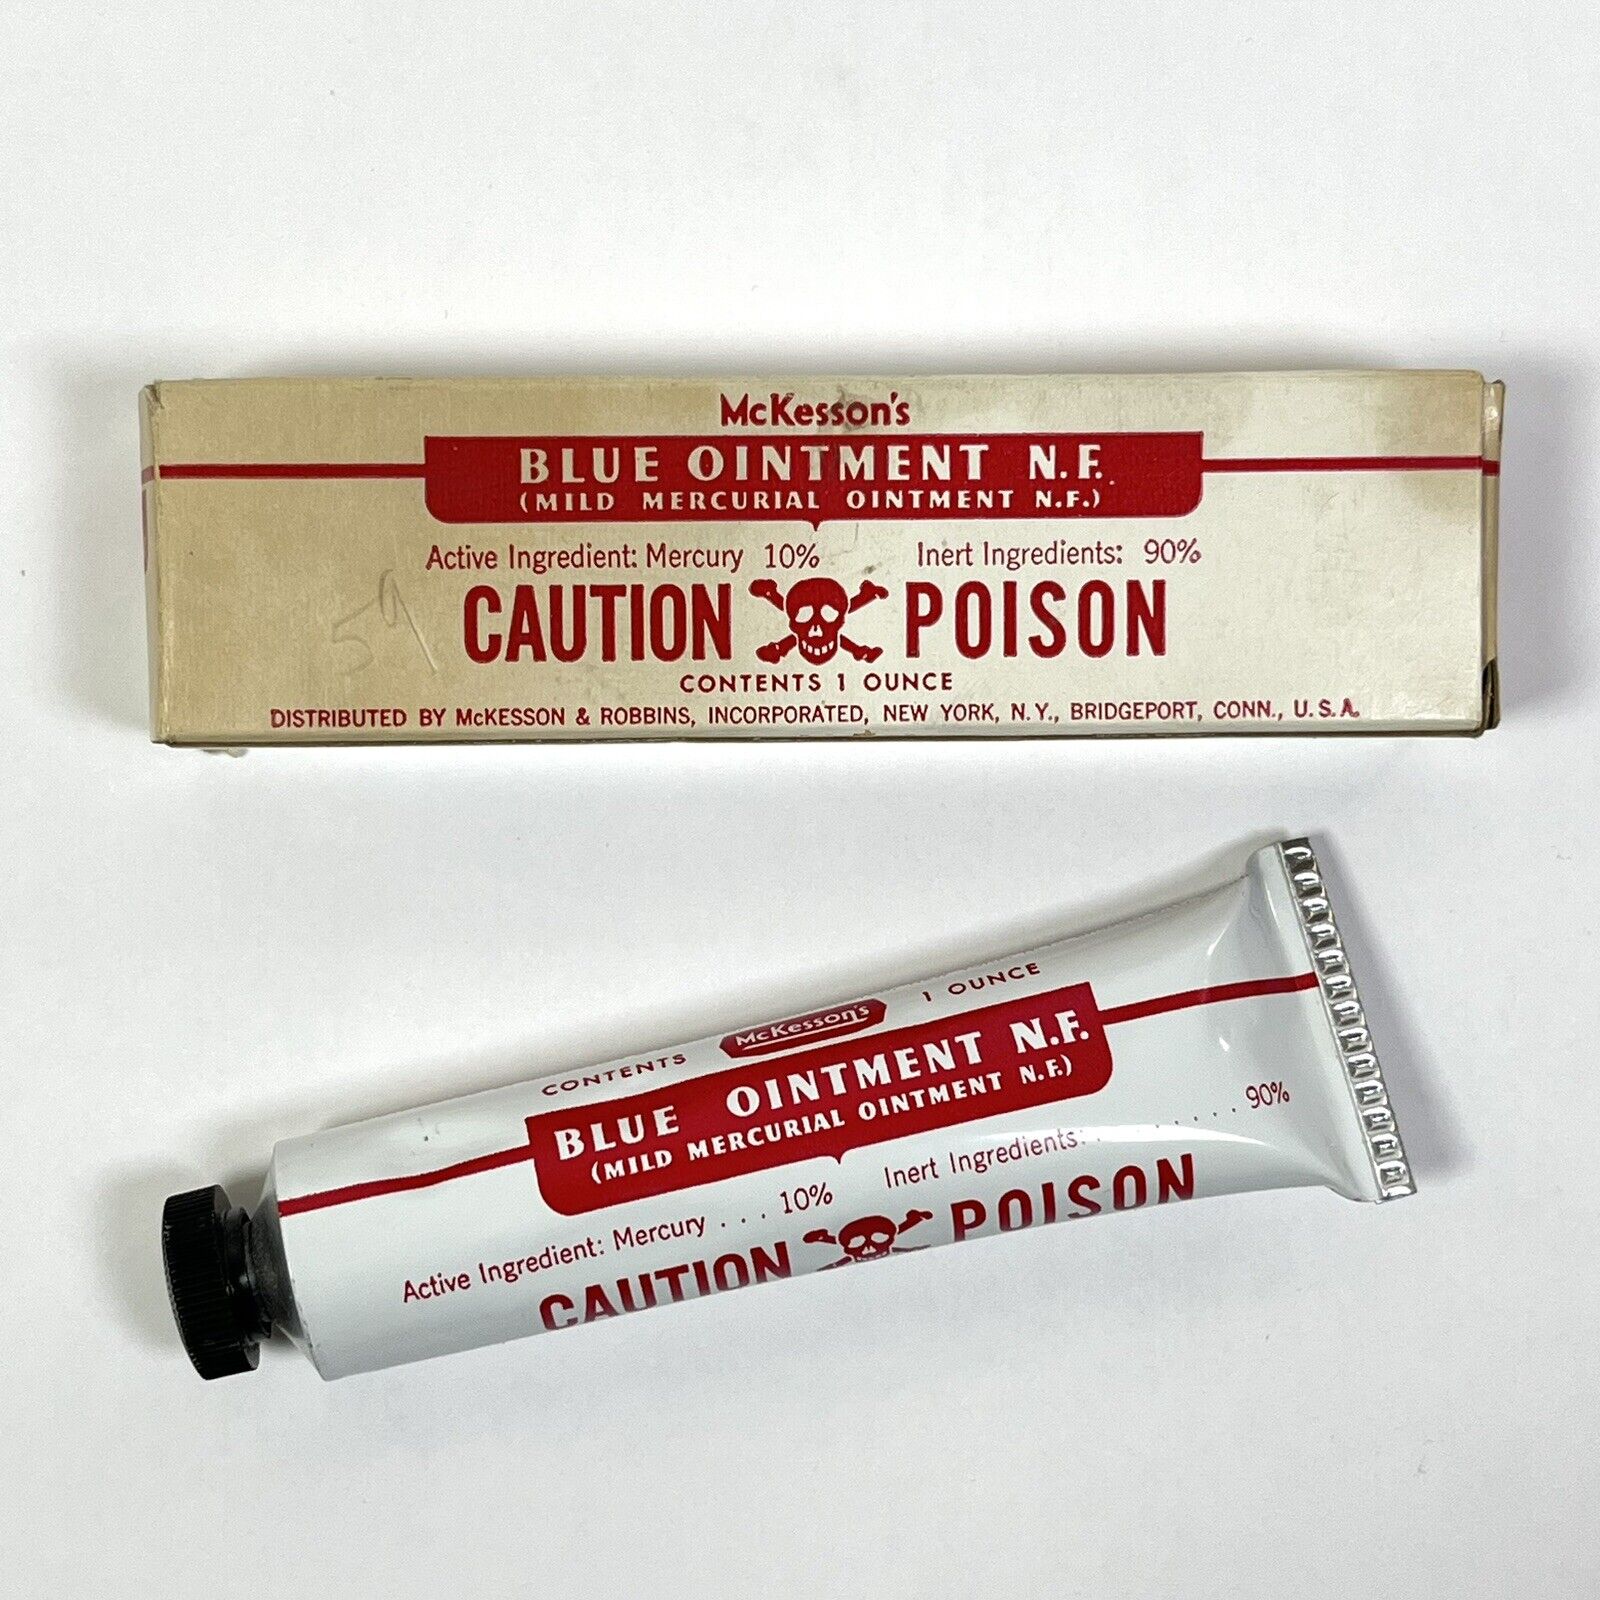 Vintage McKesson's Blue Ointment N.E. -full 1 oz tube & box OLD packaging